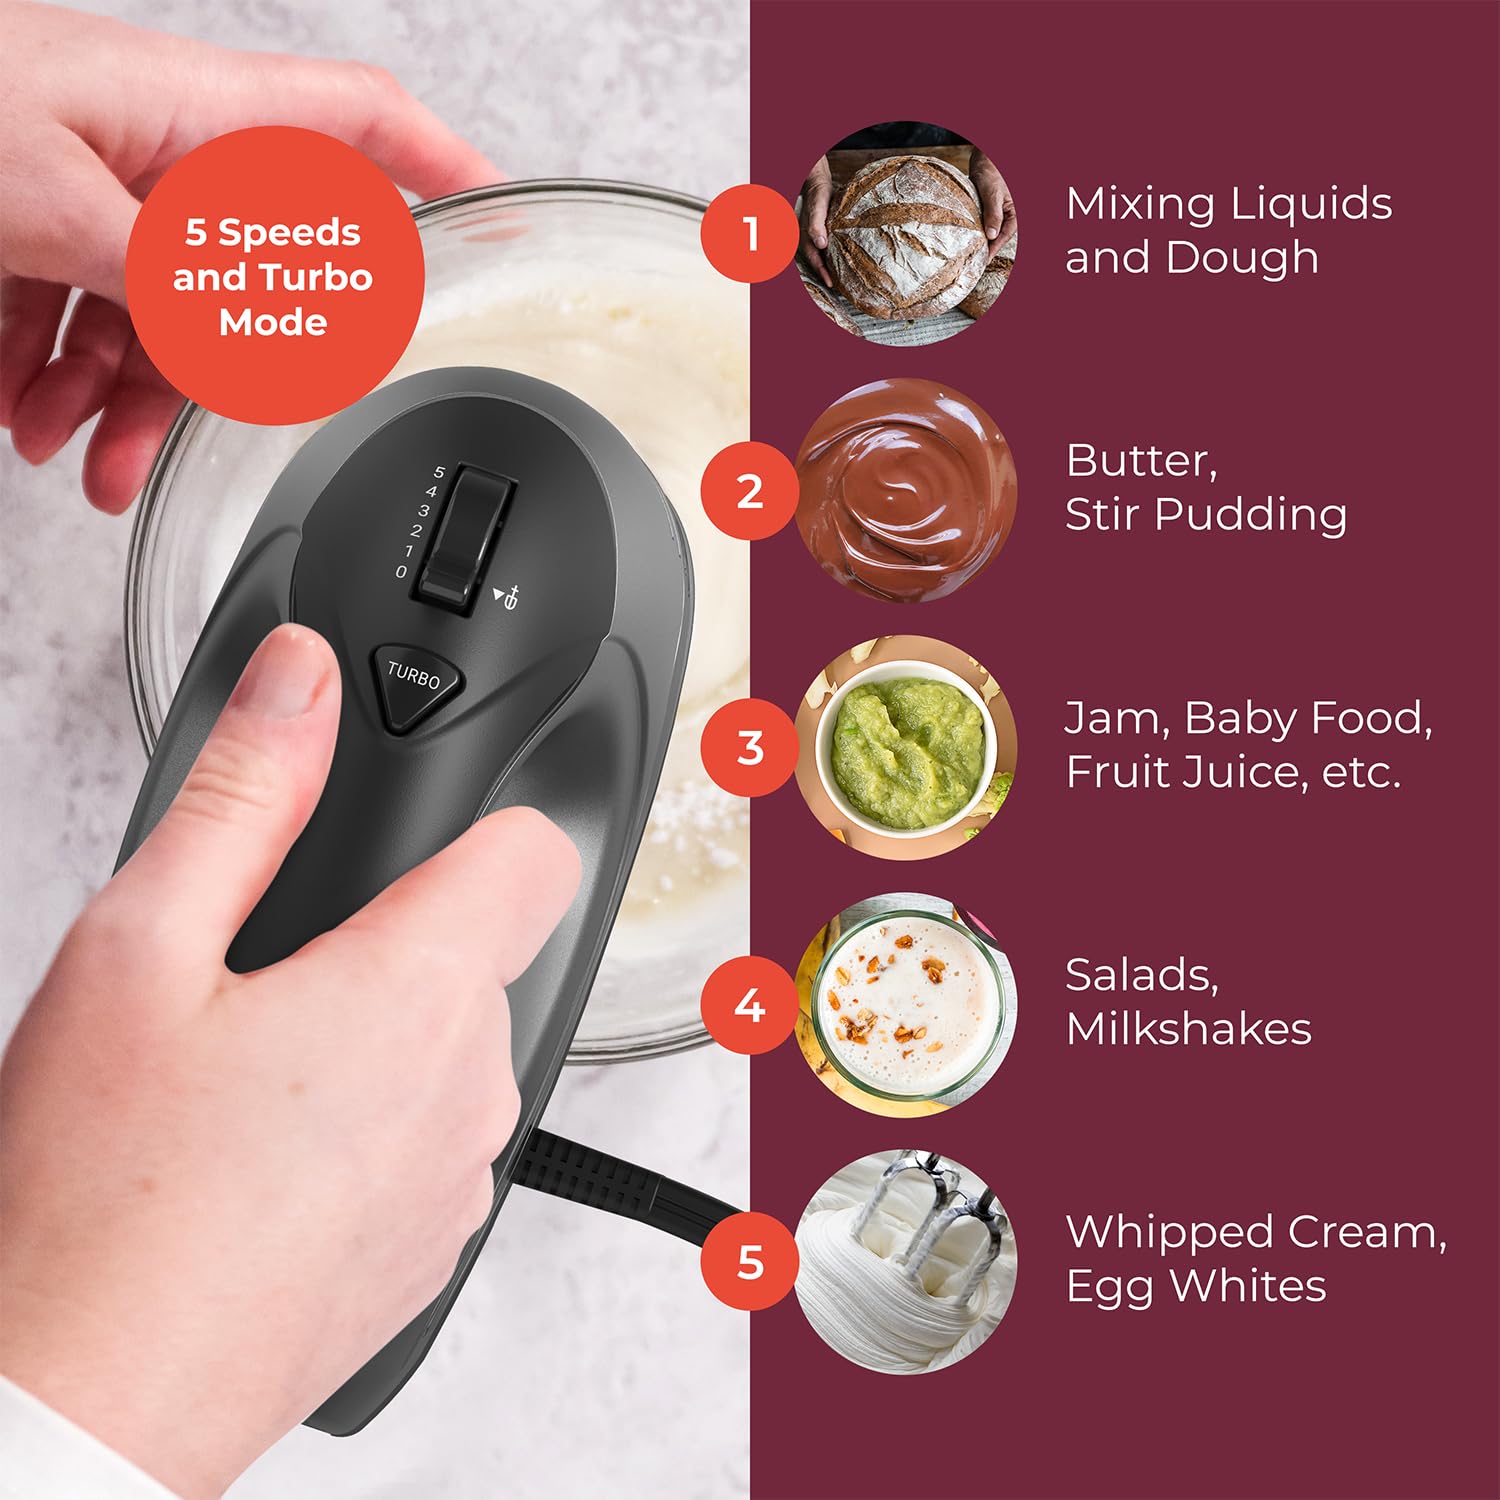 Mueller Electric Hand Mixer, 5 Speed 250W Turbo with Snap-On Storage Case and 4 Stainless Steel Accessories for Easy Whipping, Mixing Cookies, Brownies, Cakes, and Dough Batters